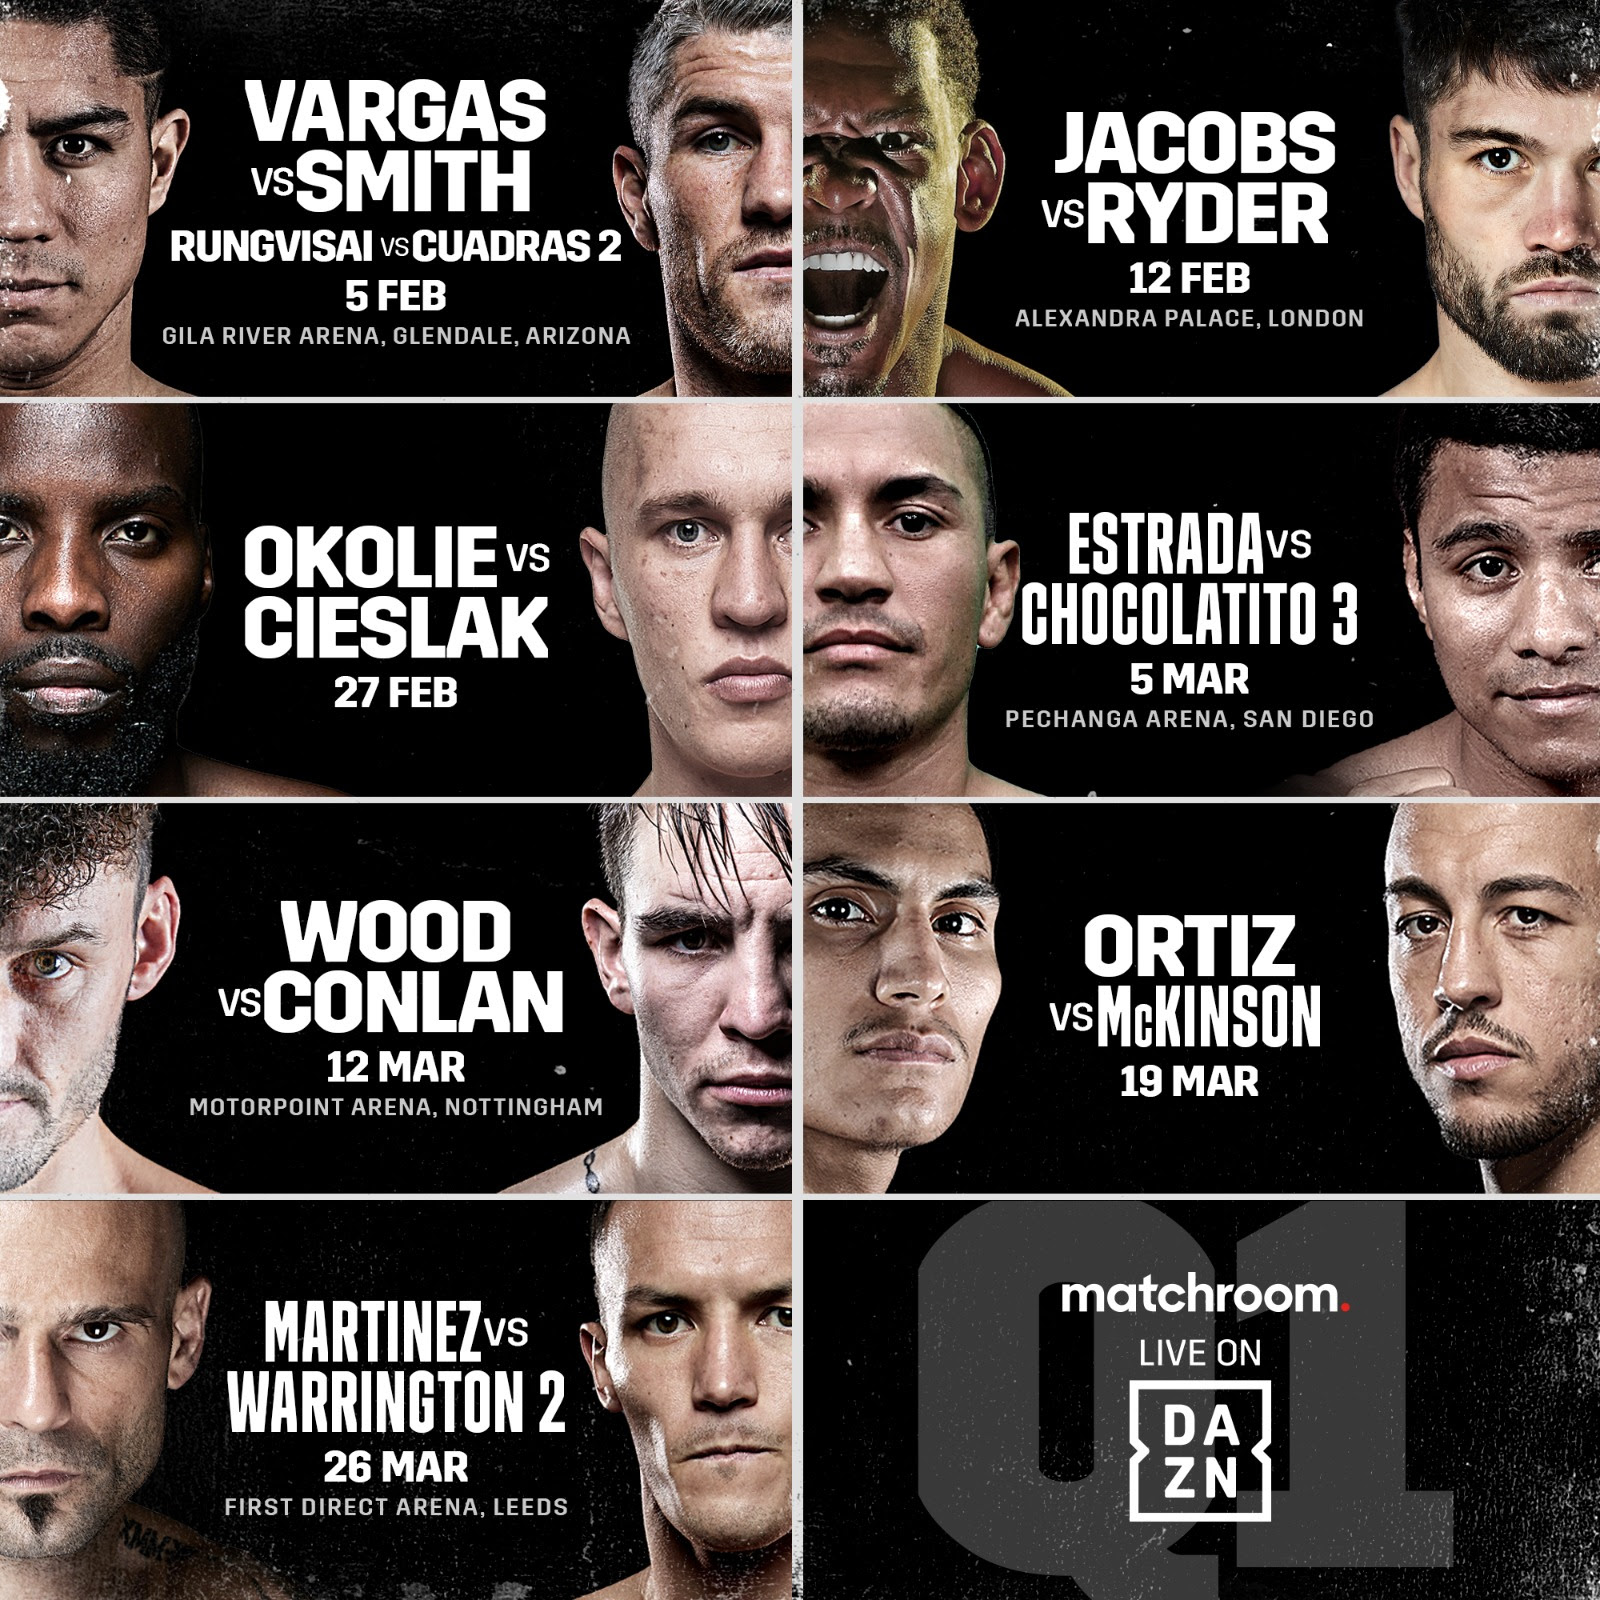 Image: Matchroom Boxing: Seven massive fight nights in America and the UK to kick off a huge year on DAZN